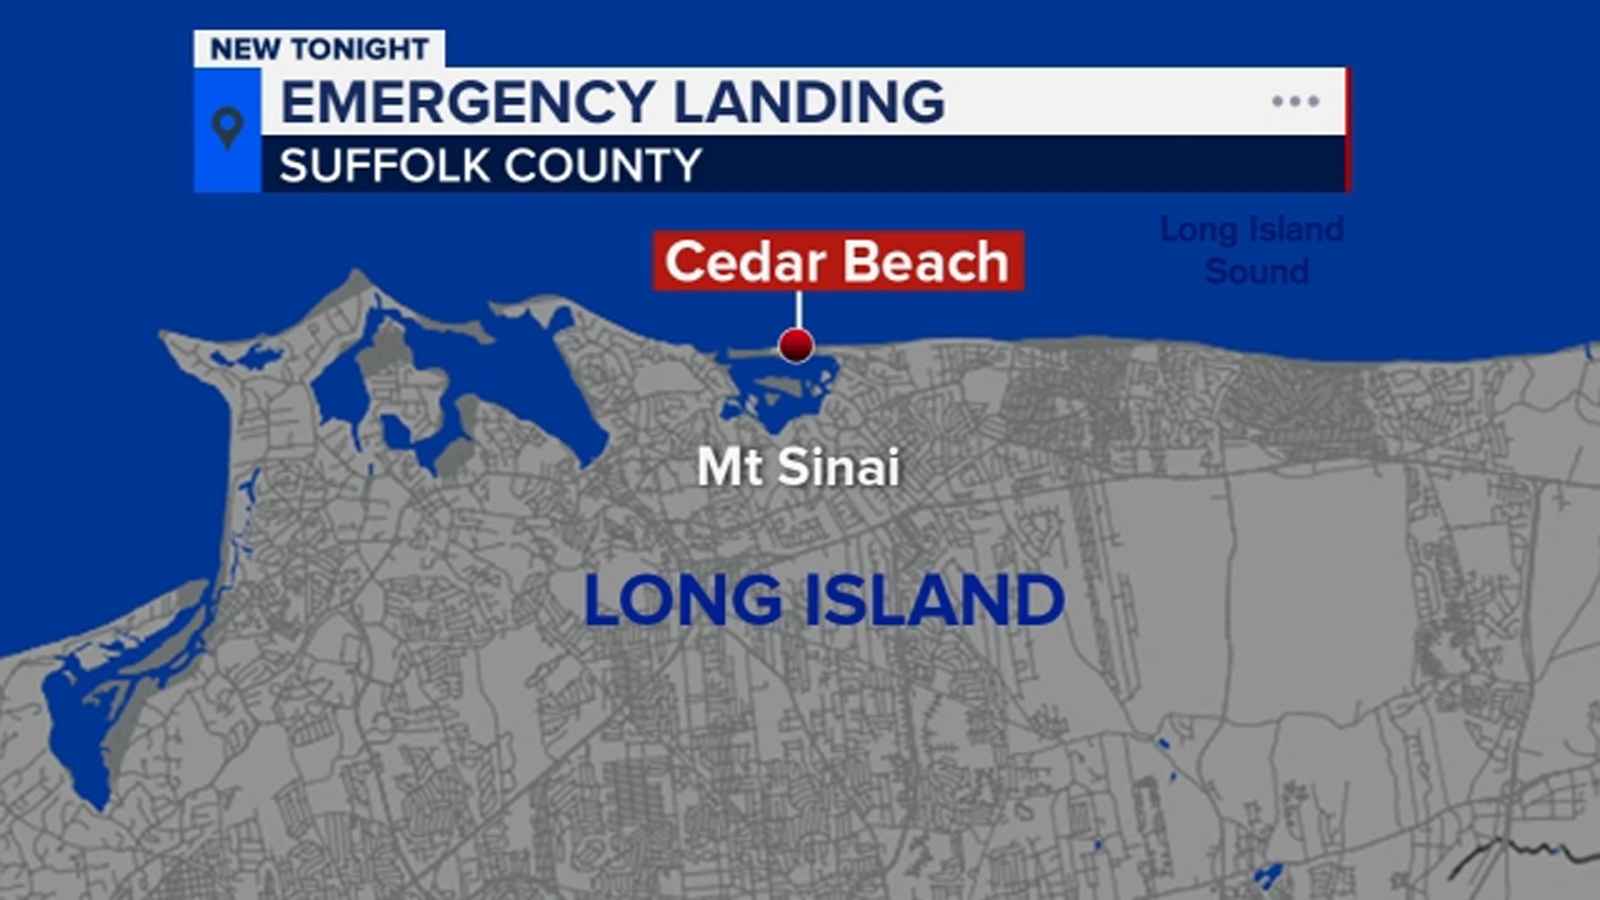 Long Island emergency landing: Cessna 152 plane forced to land on Cedar Beach, Mt. Sinai after reported engine failure [Video]